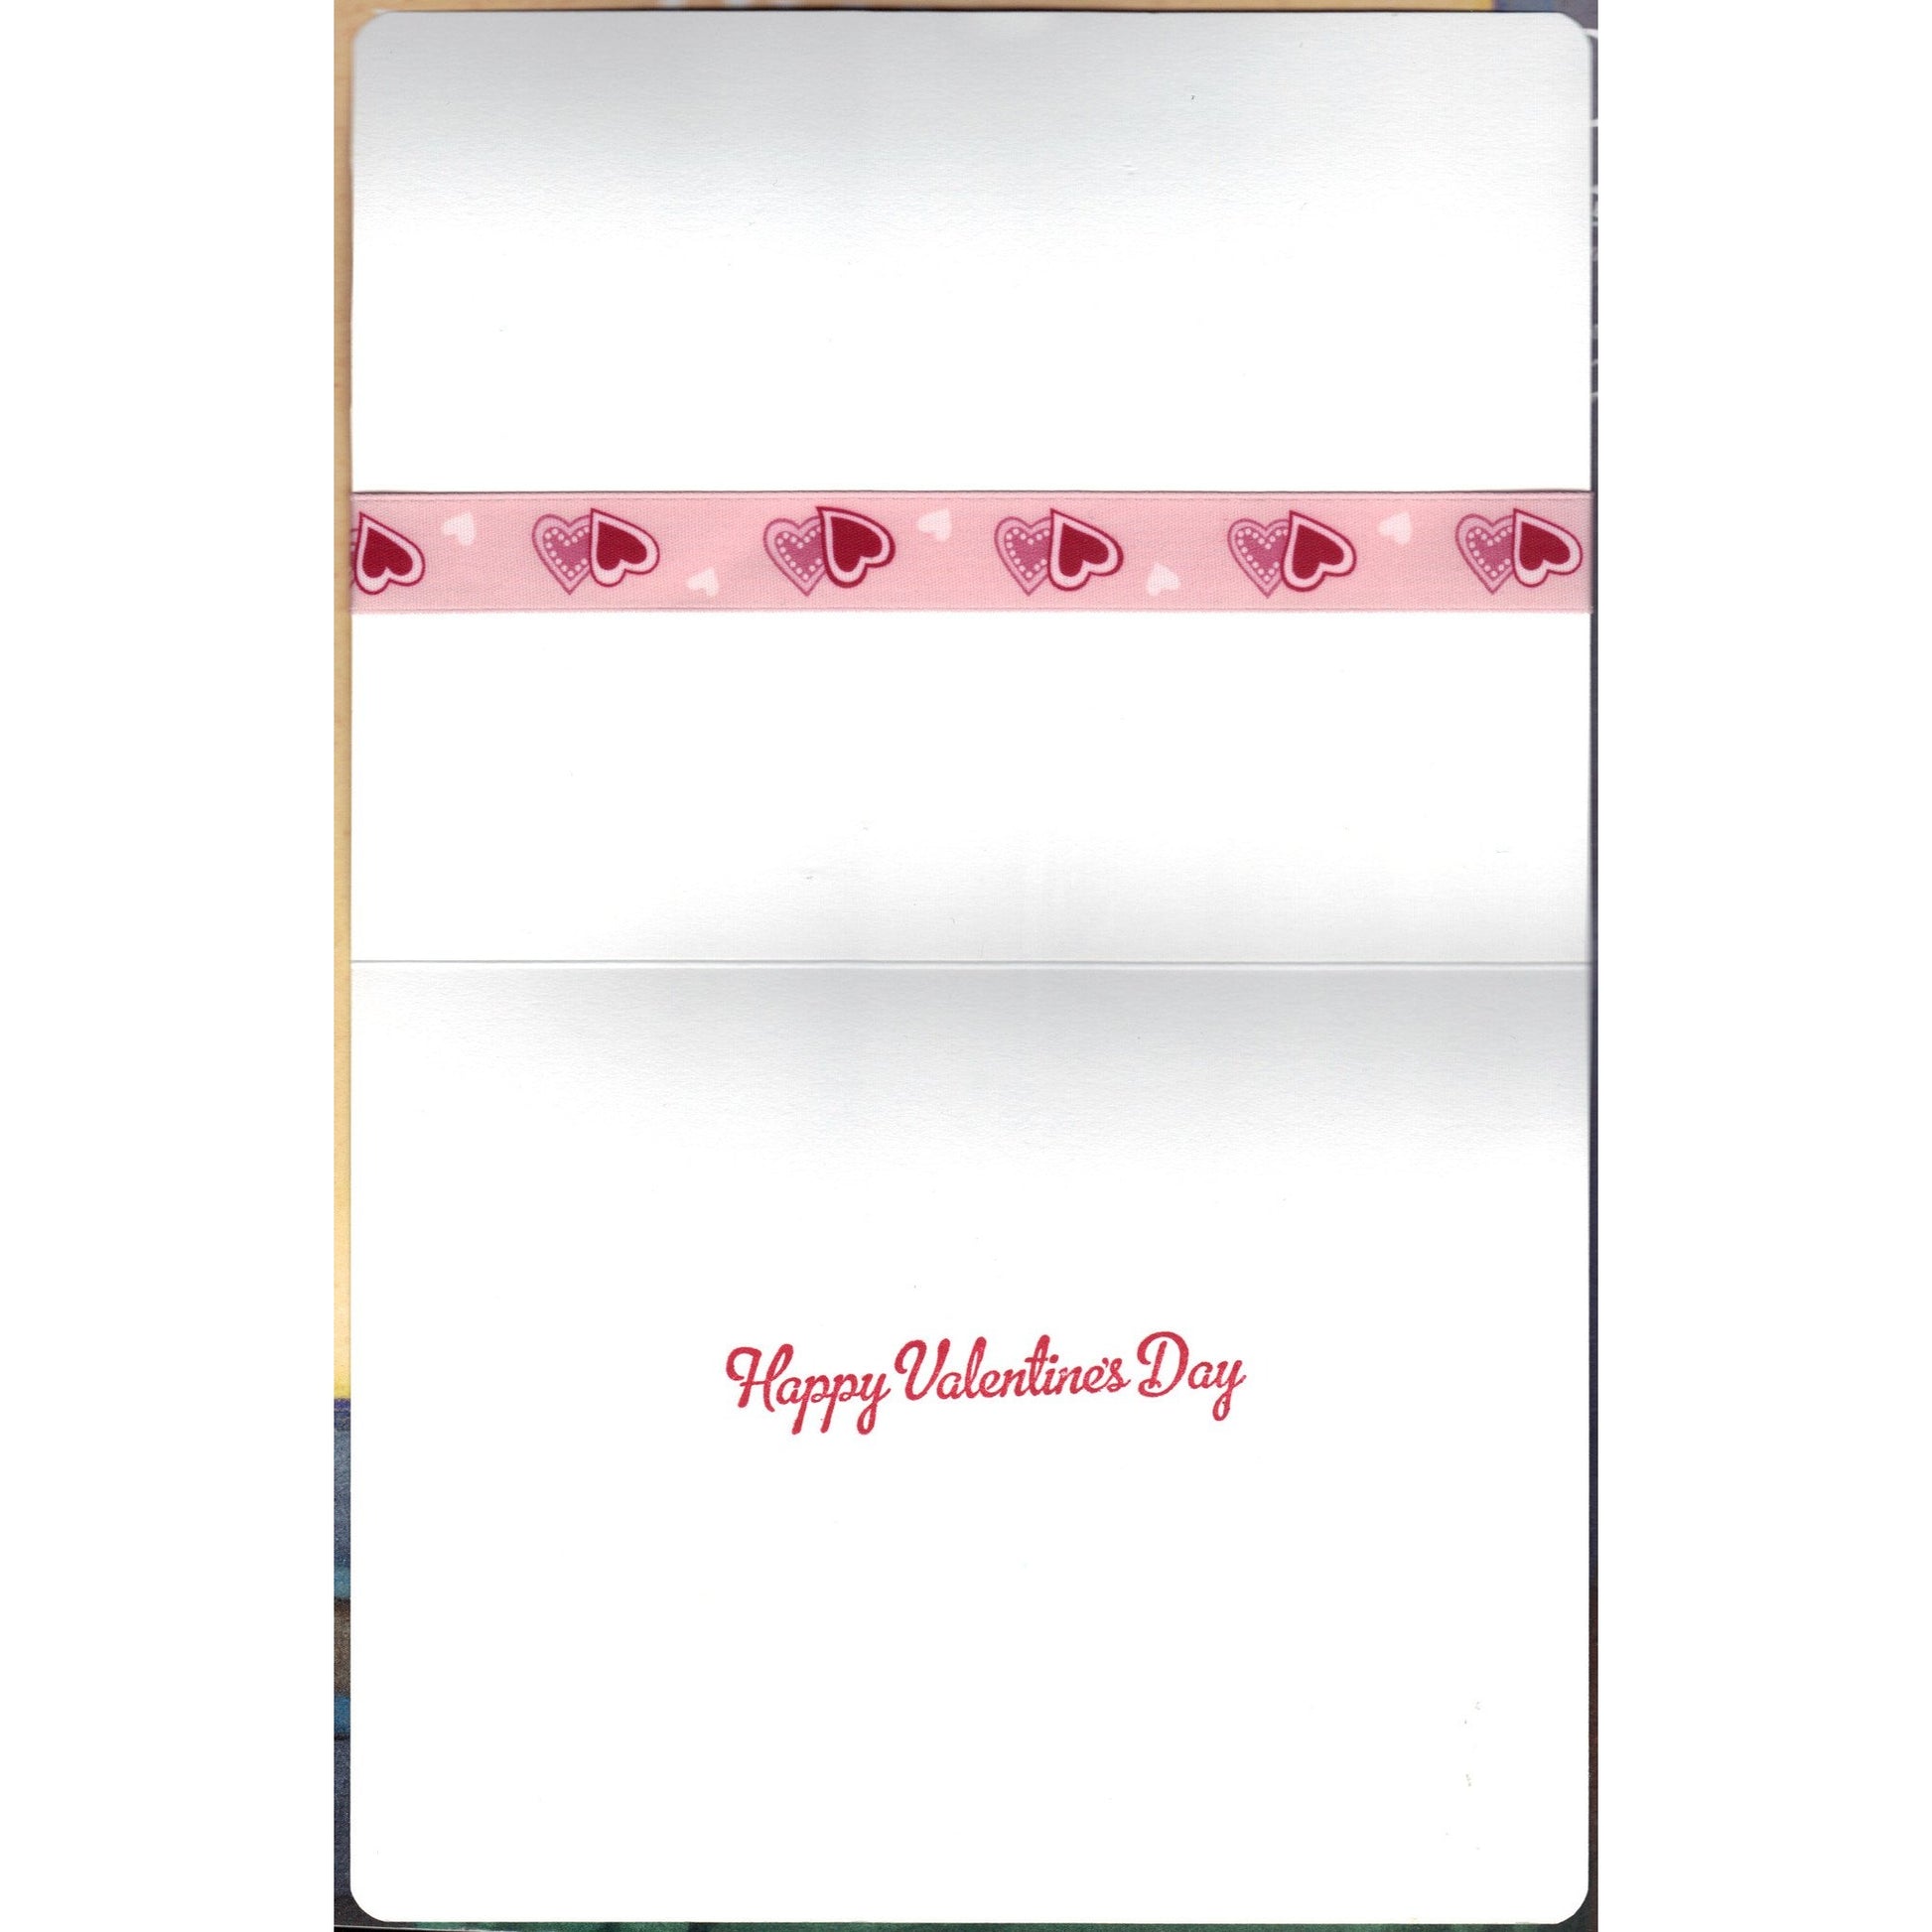 Happy Valentines Day Handmade Good Greeting Supply Card - Cards And Other Paper Products - Made In U.S.A. - SharPharMade - 3